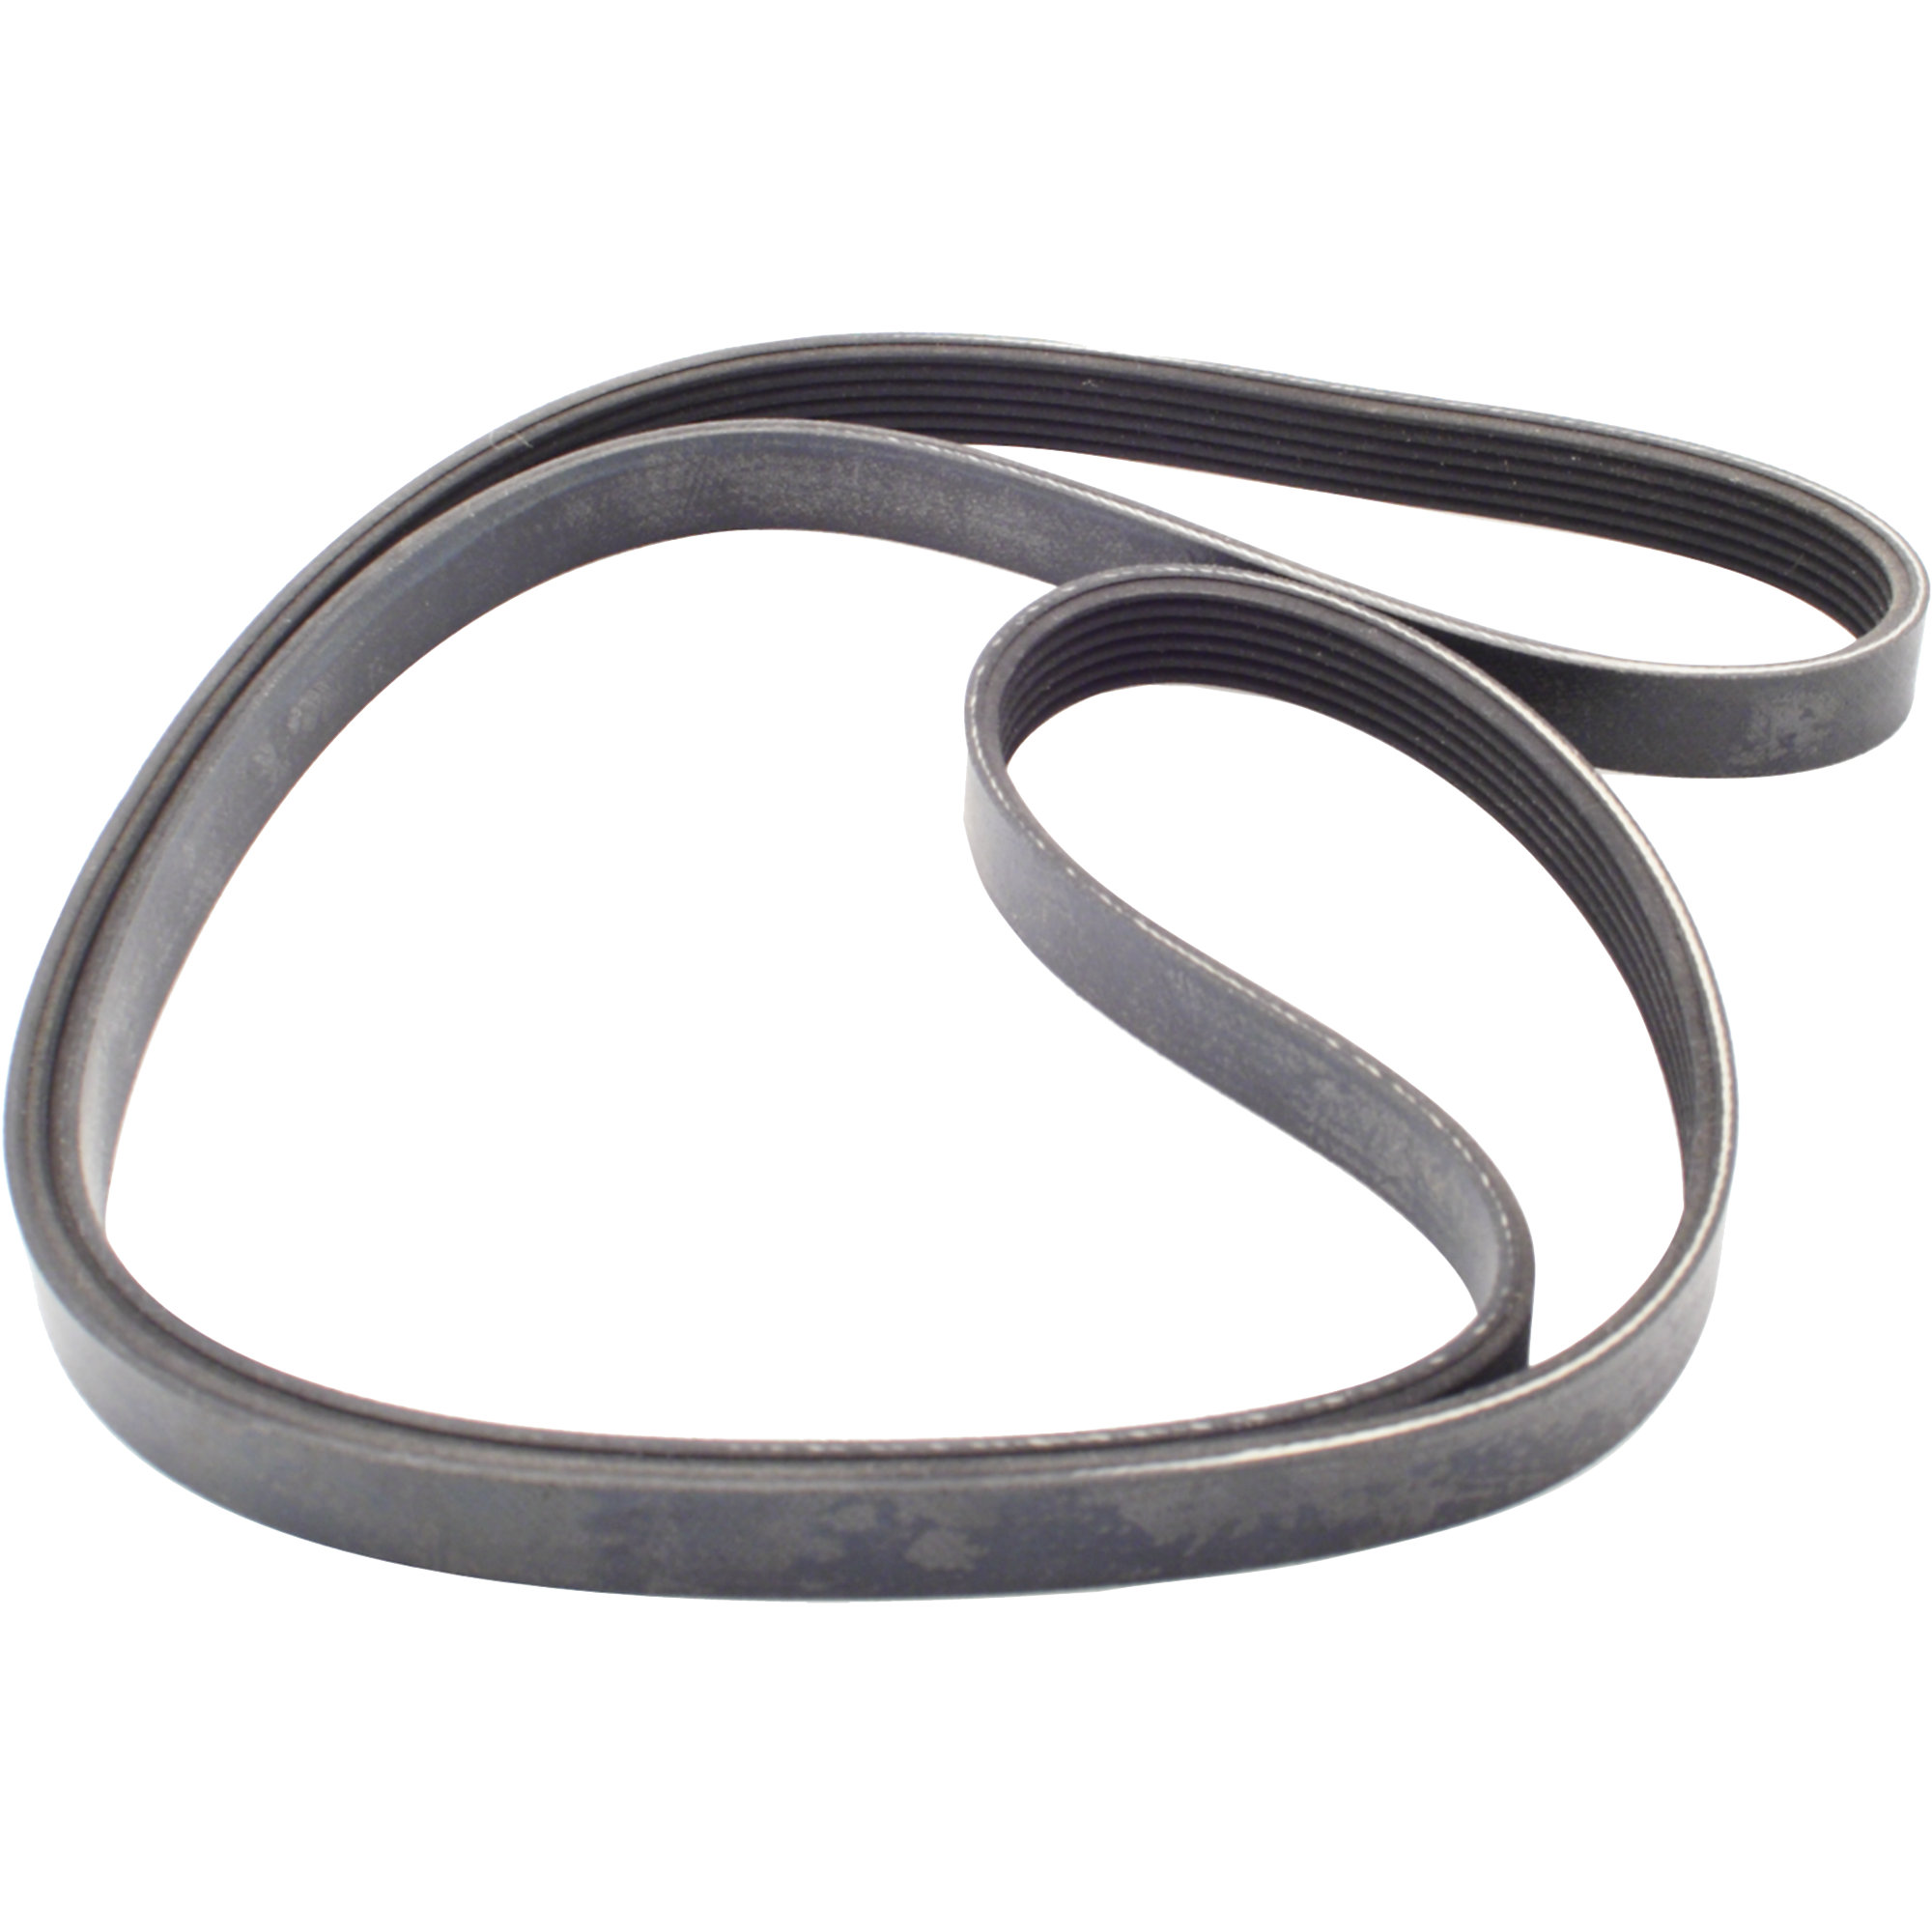 Drive Belt for certain Freemotion, NordicTrack and ProForm Bikes